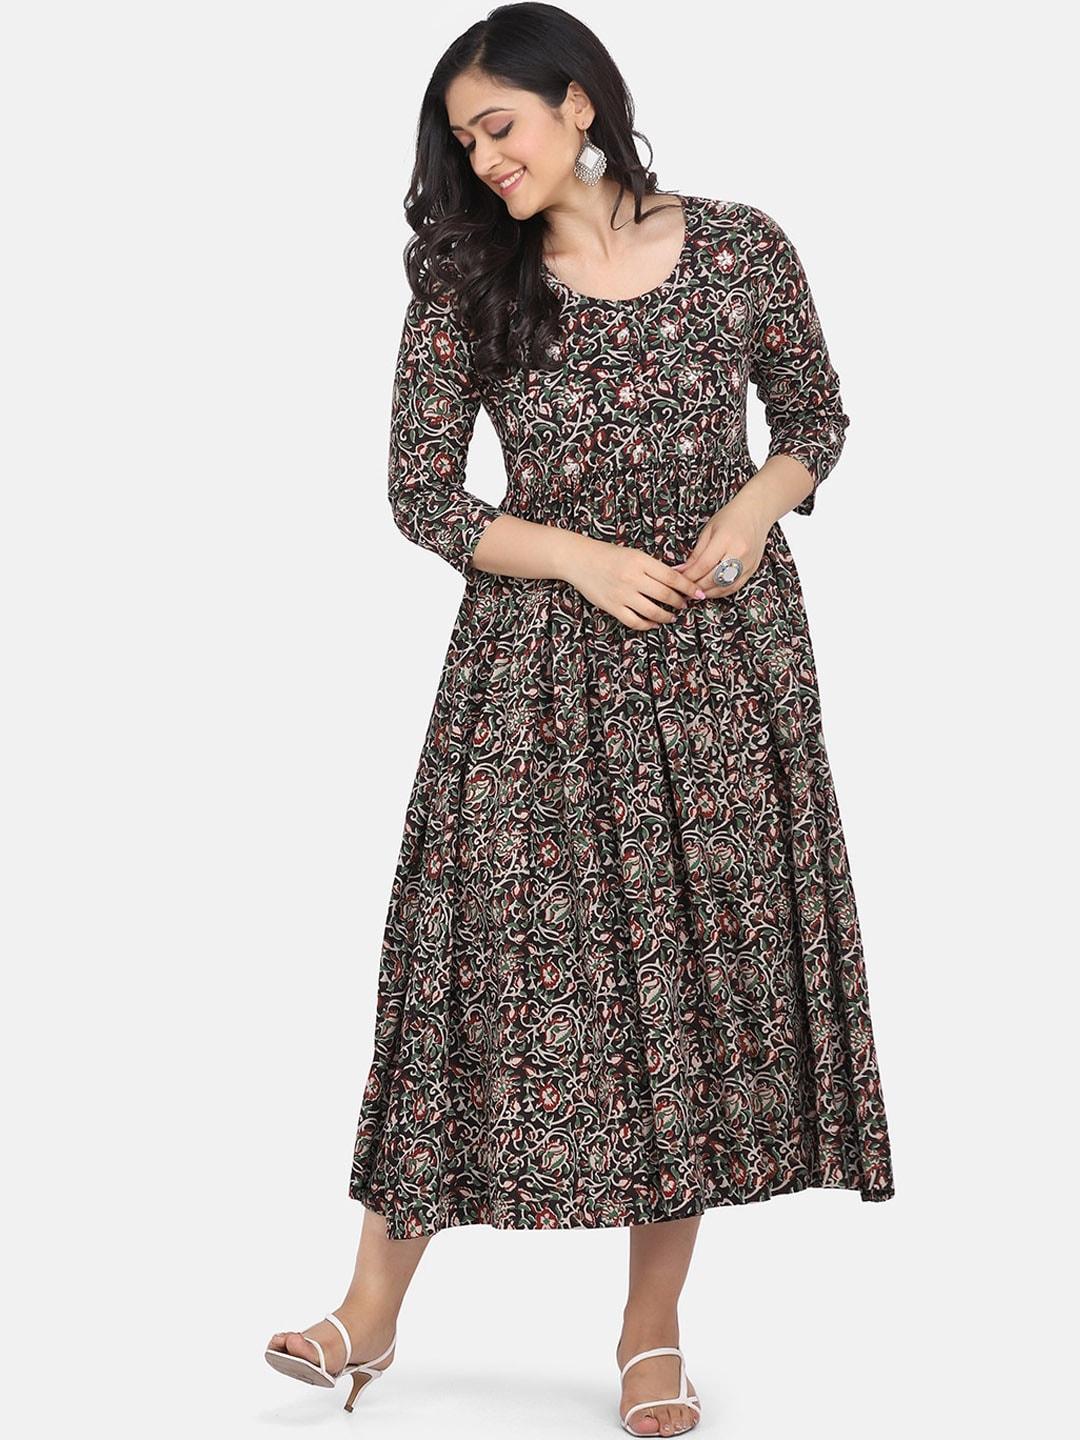 saanjh-black-floral-printed-pure-cotton-fit-&-flare-midi-dress